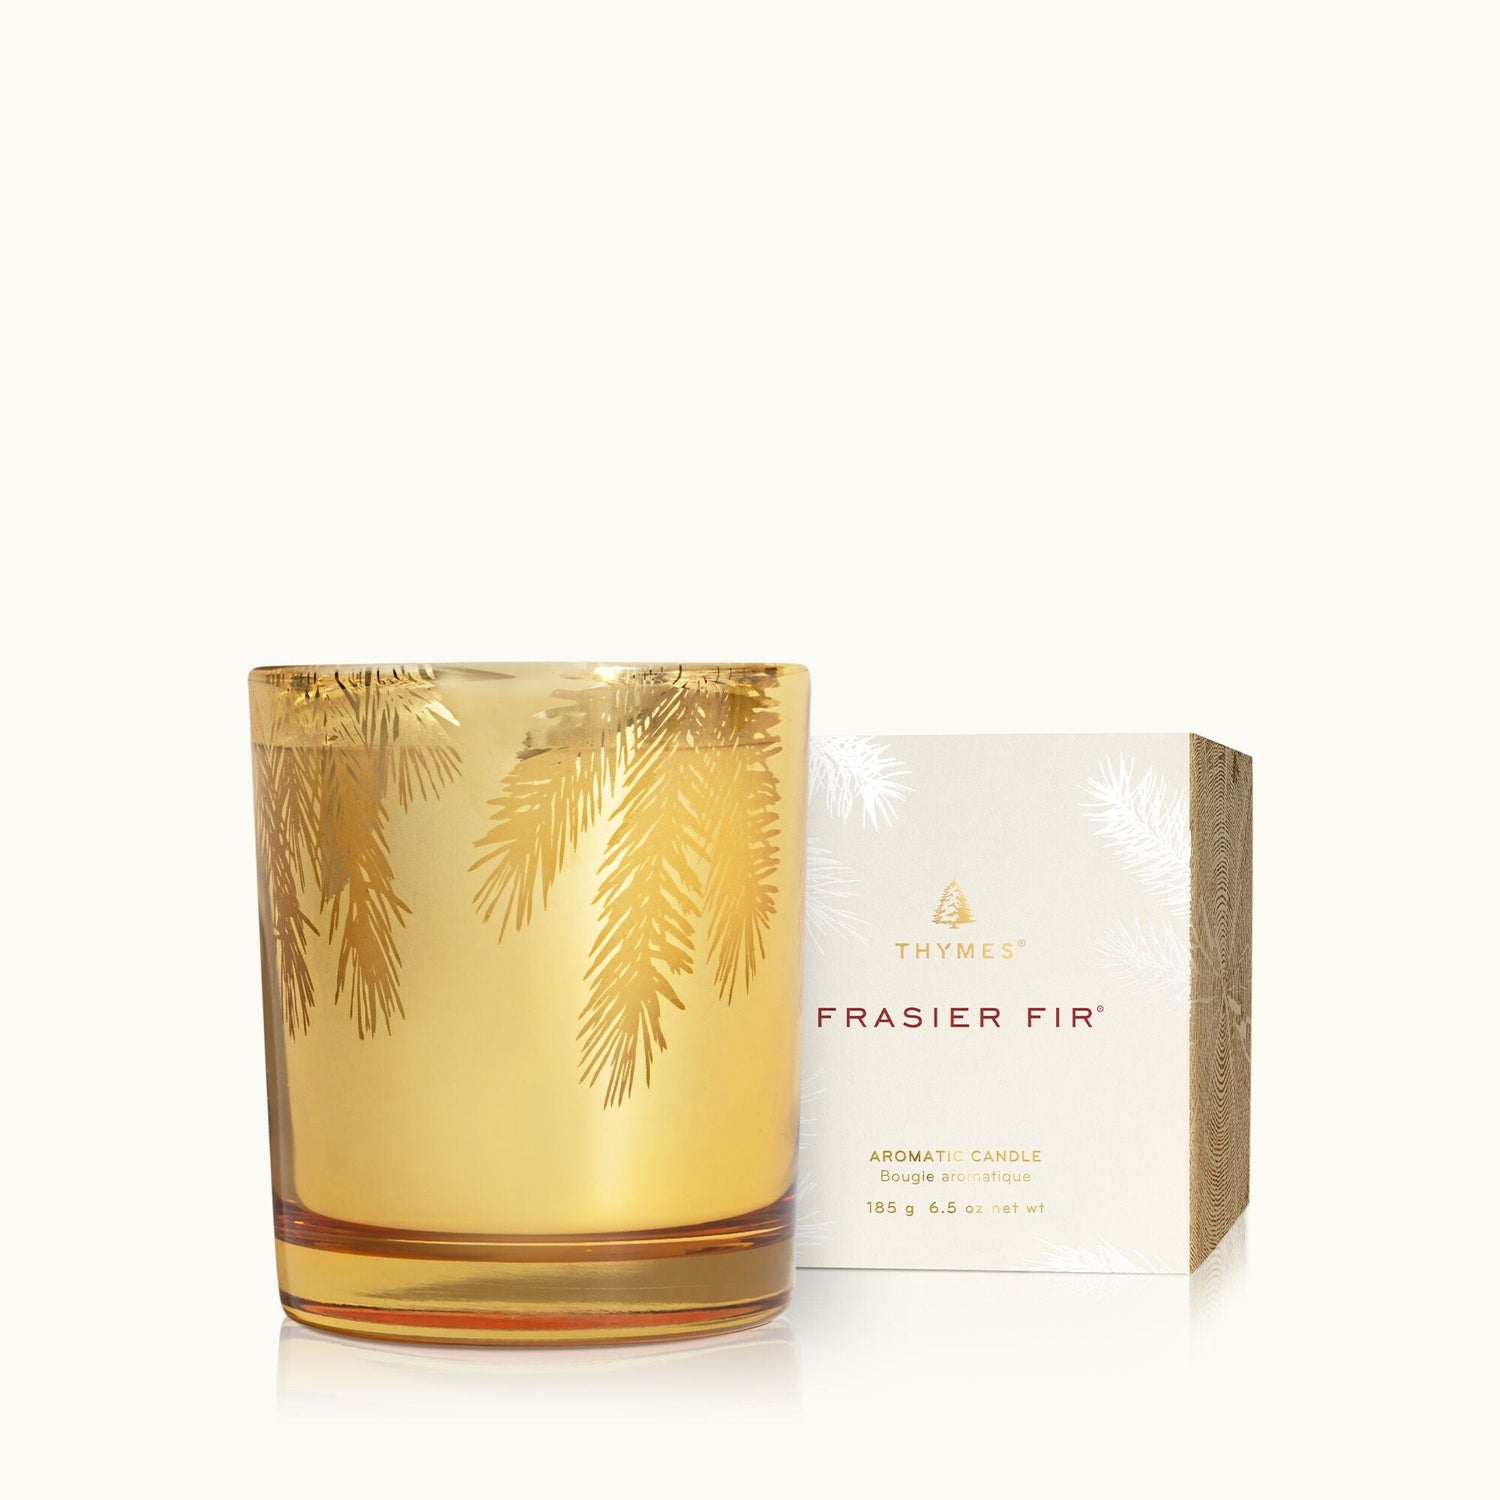 Frasier Fir Gilded Gold Poured Candle - Gaines Jewelers